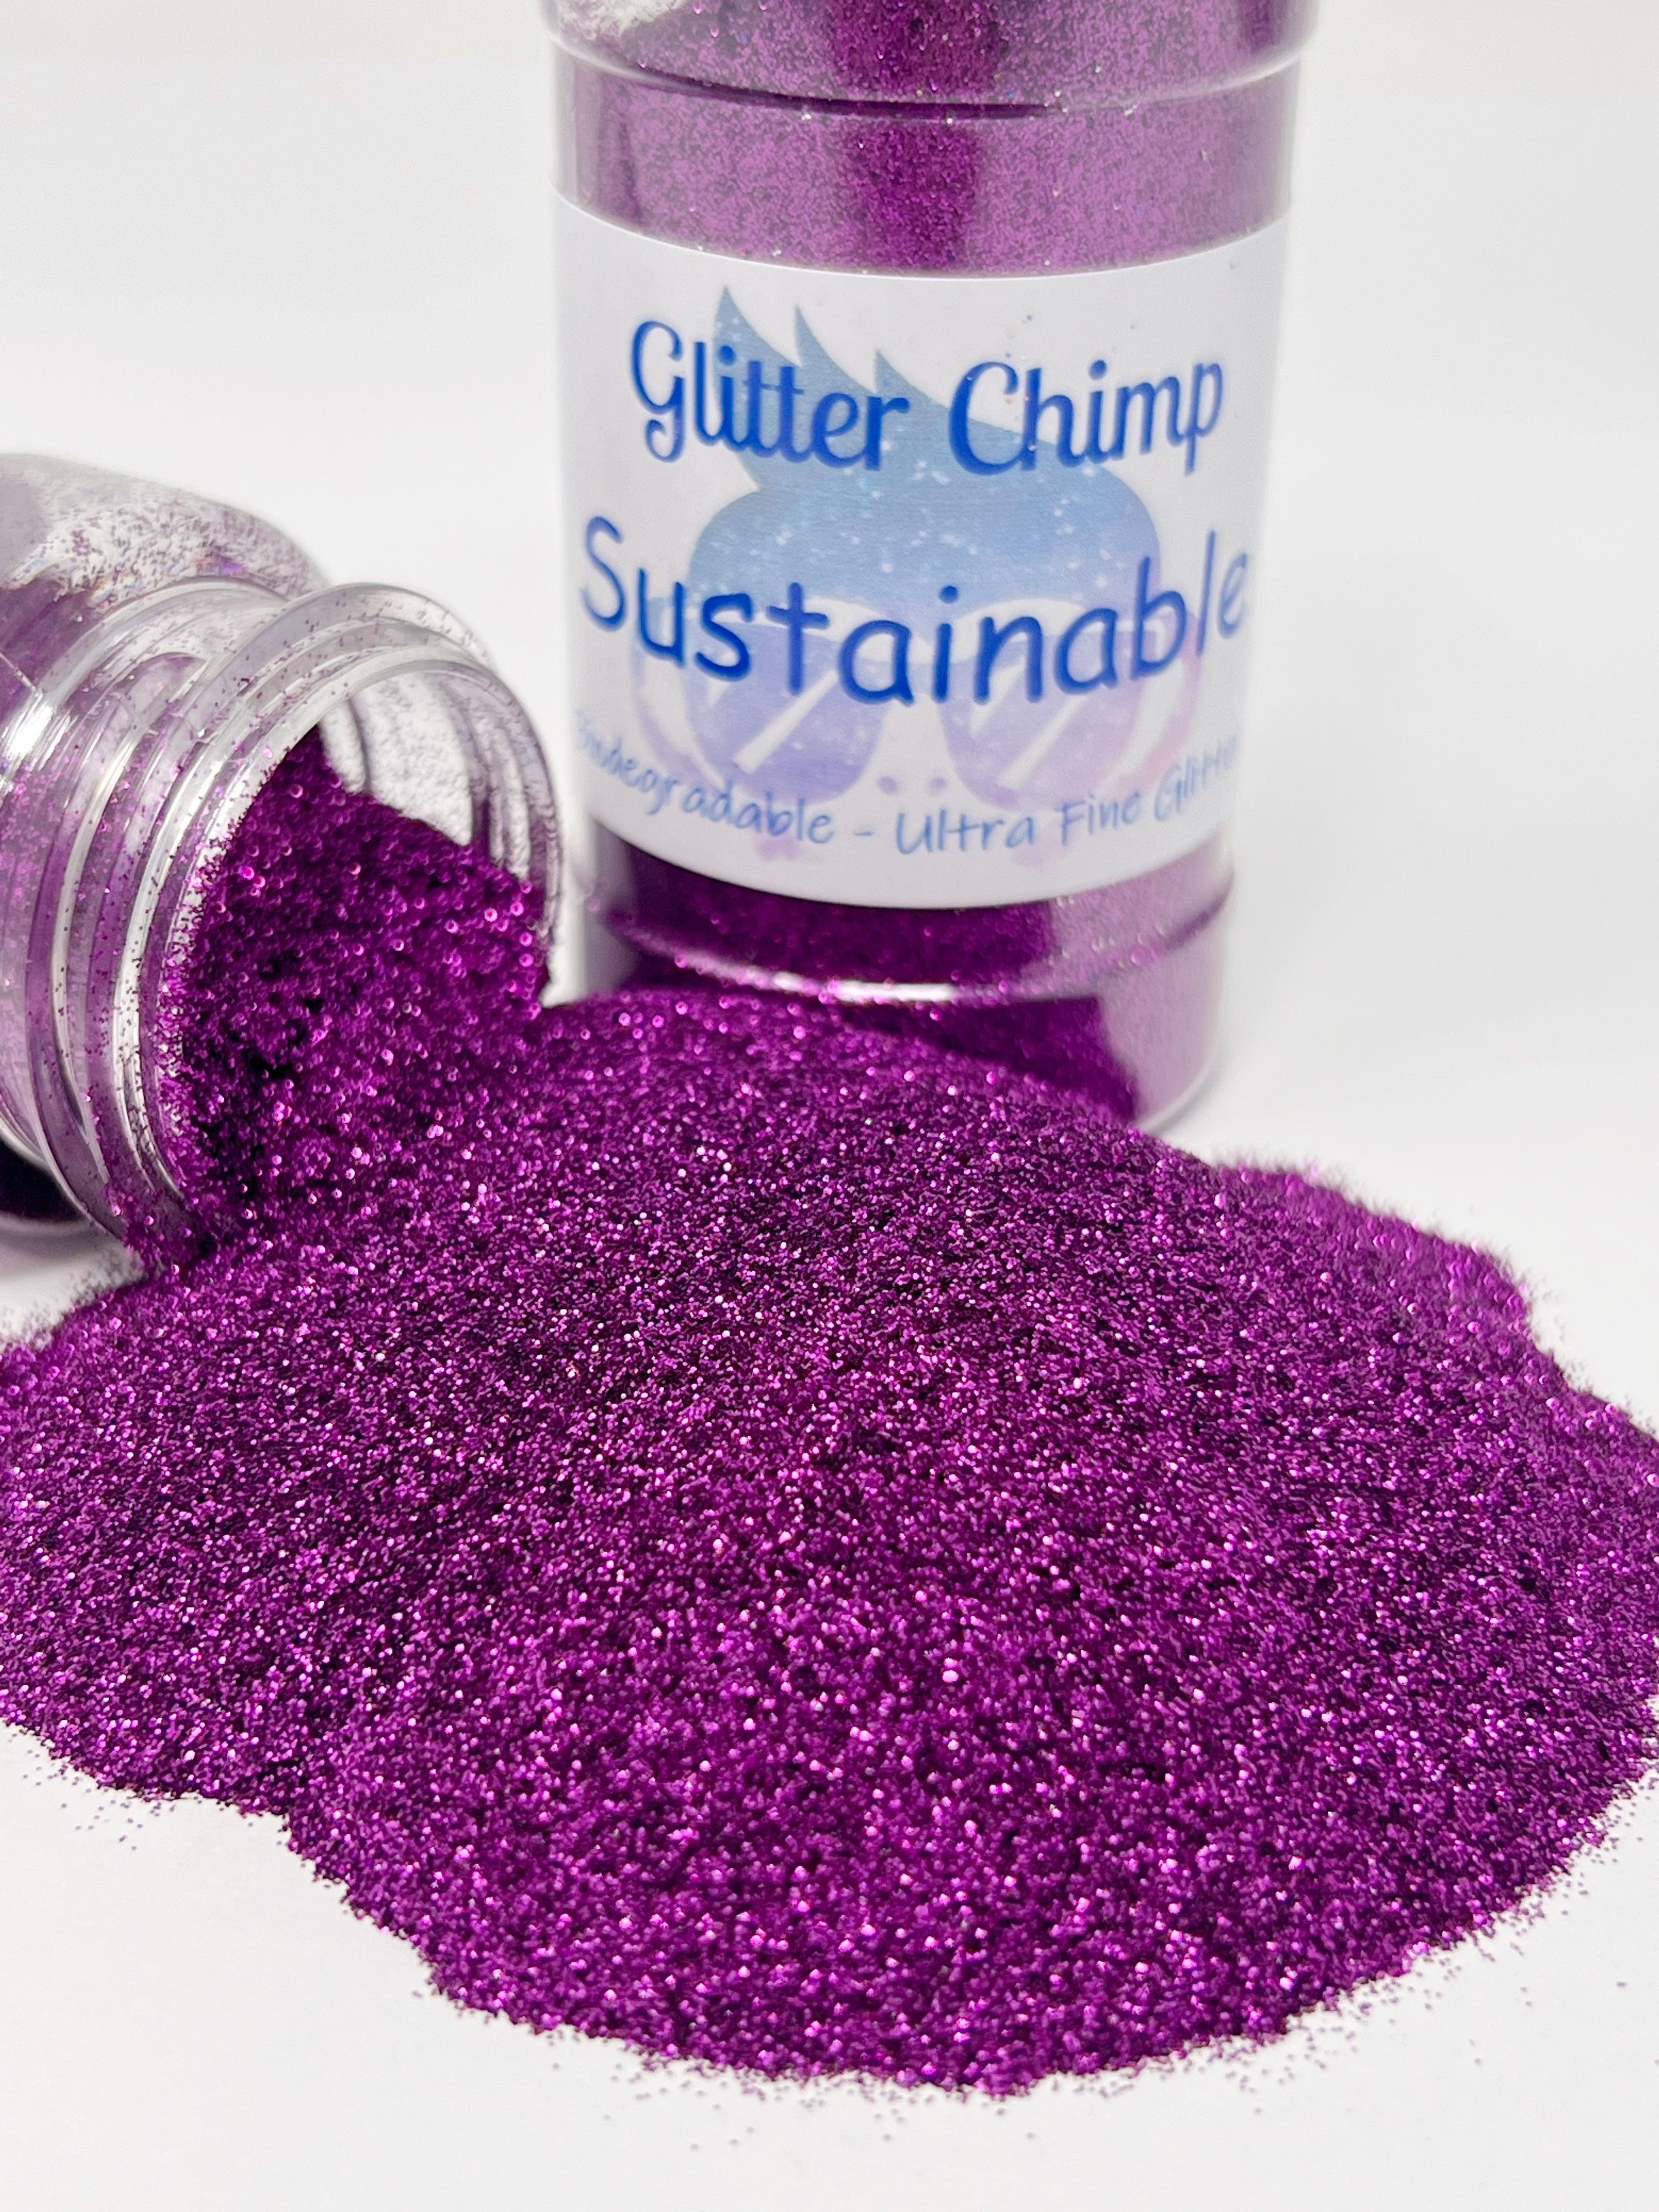 Non-Toxic Biodegradable Glitter for Makeup: Sustainable and Safe